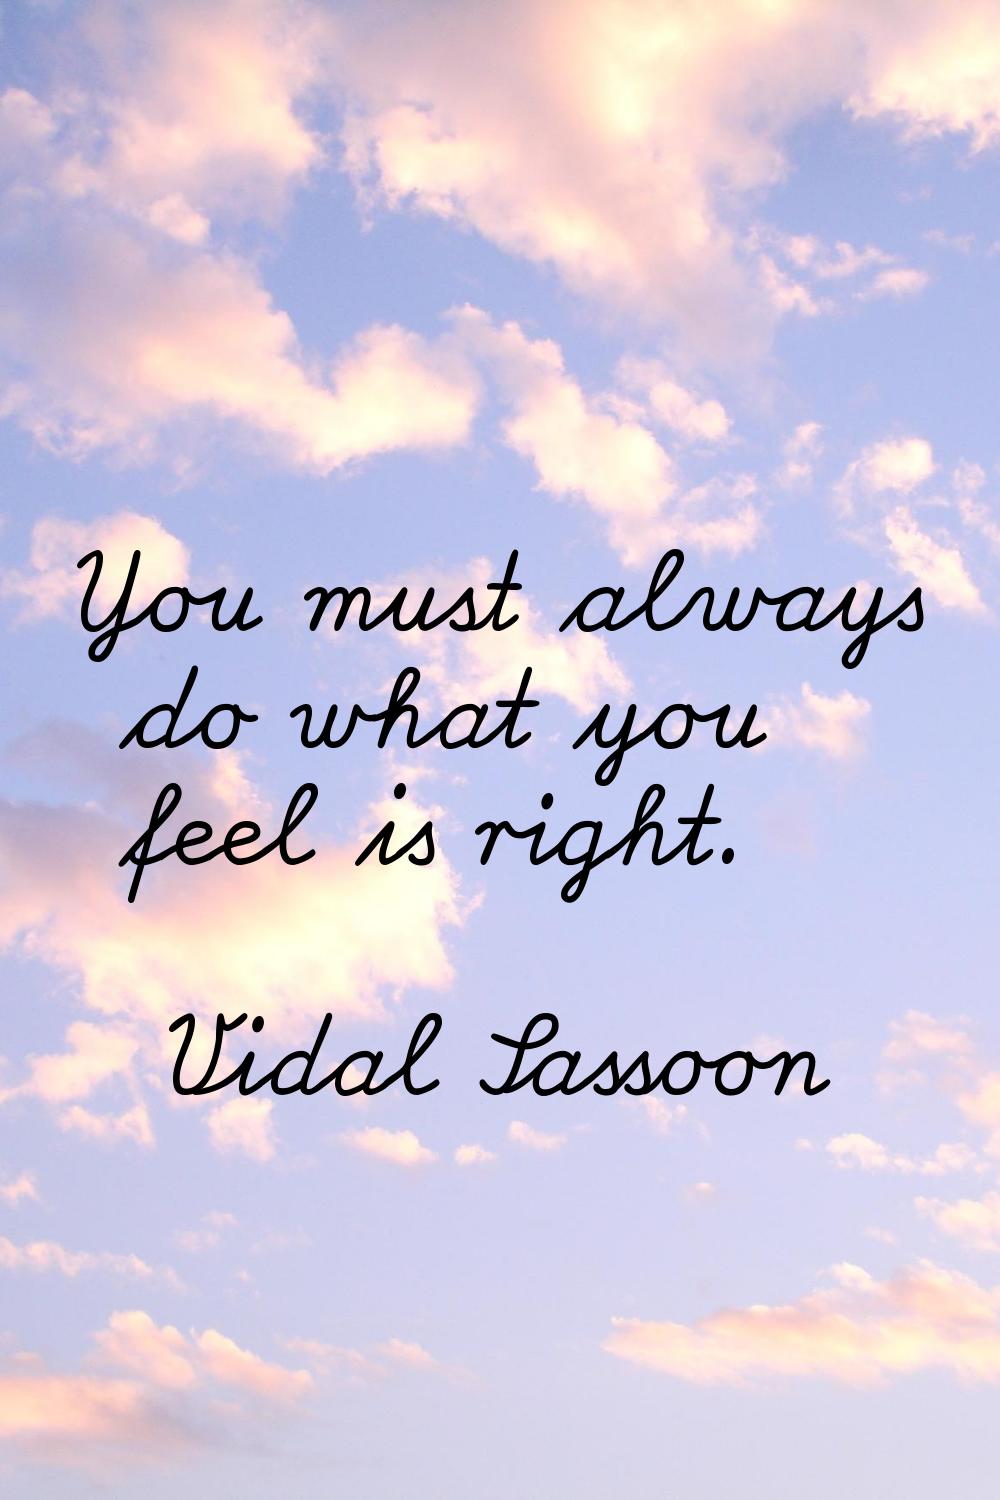 You must always do what you feel is right.